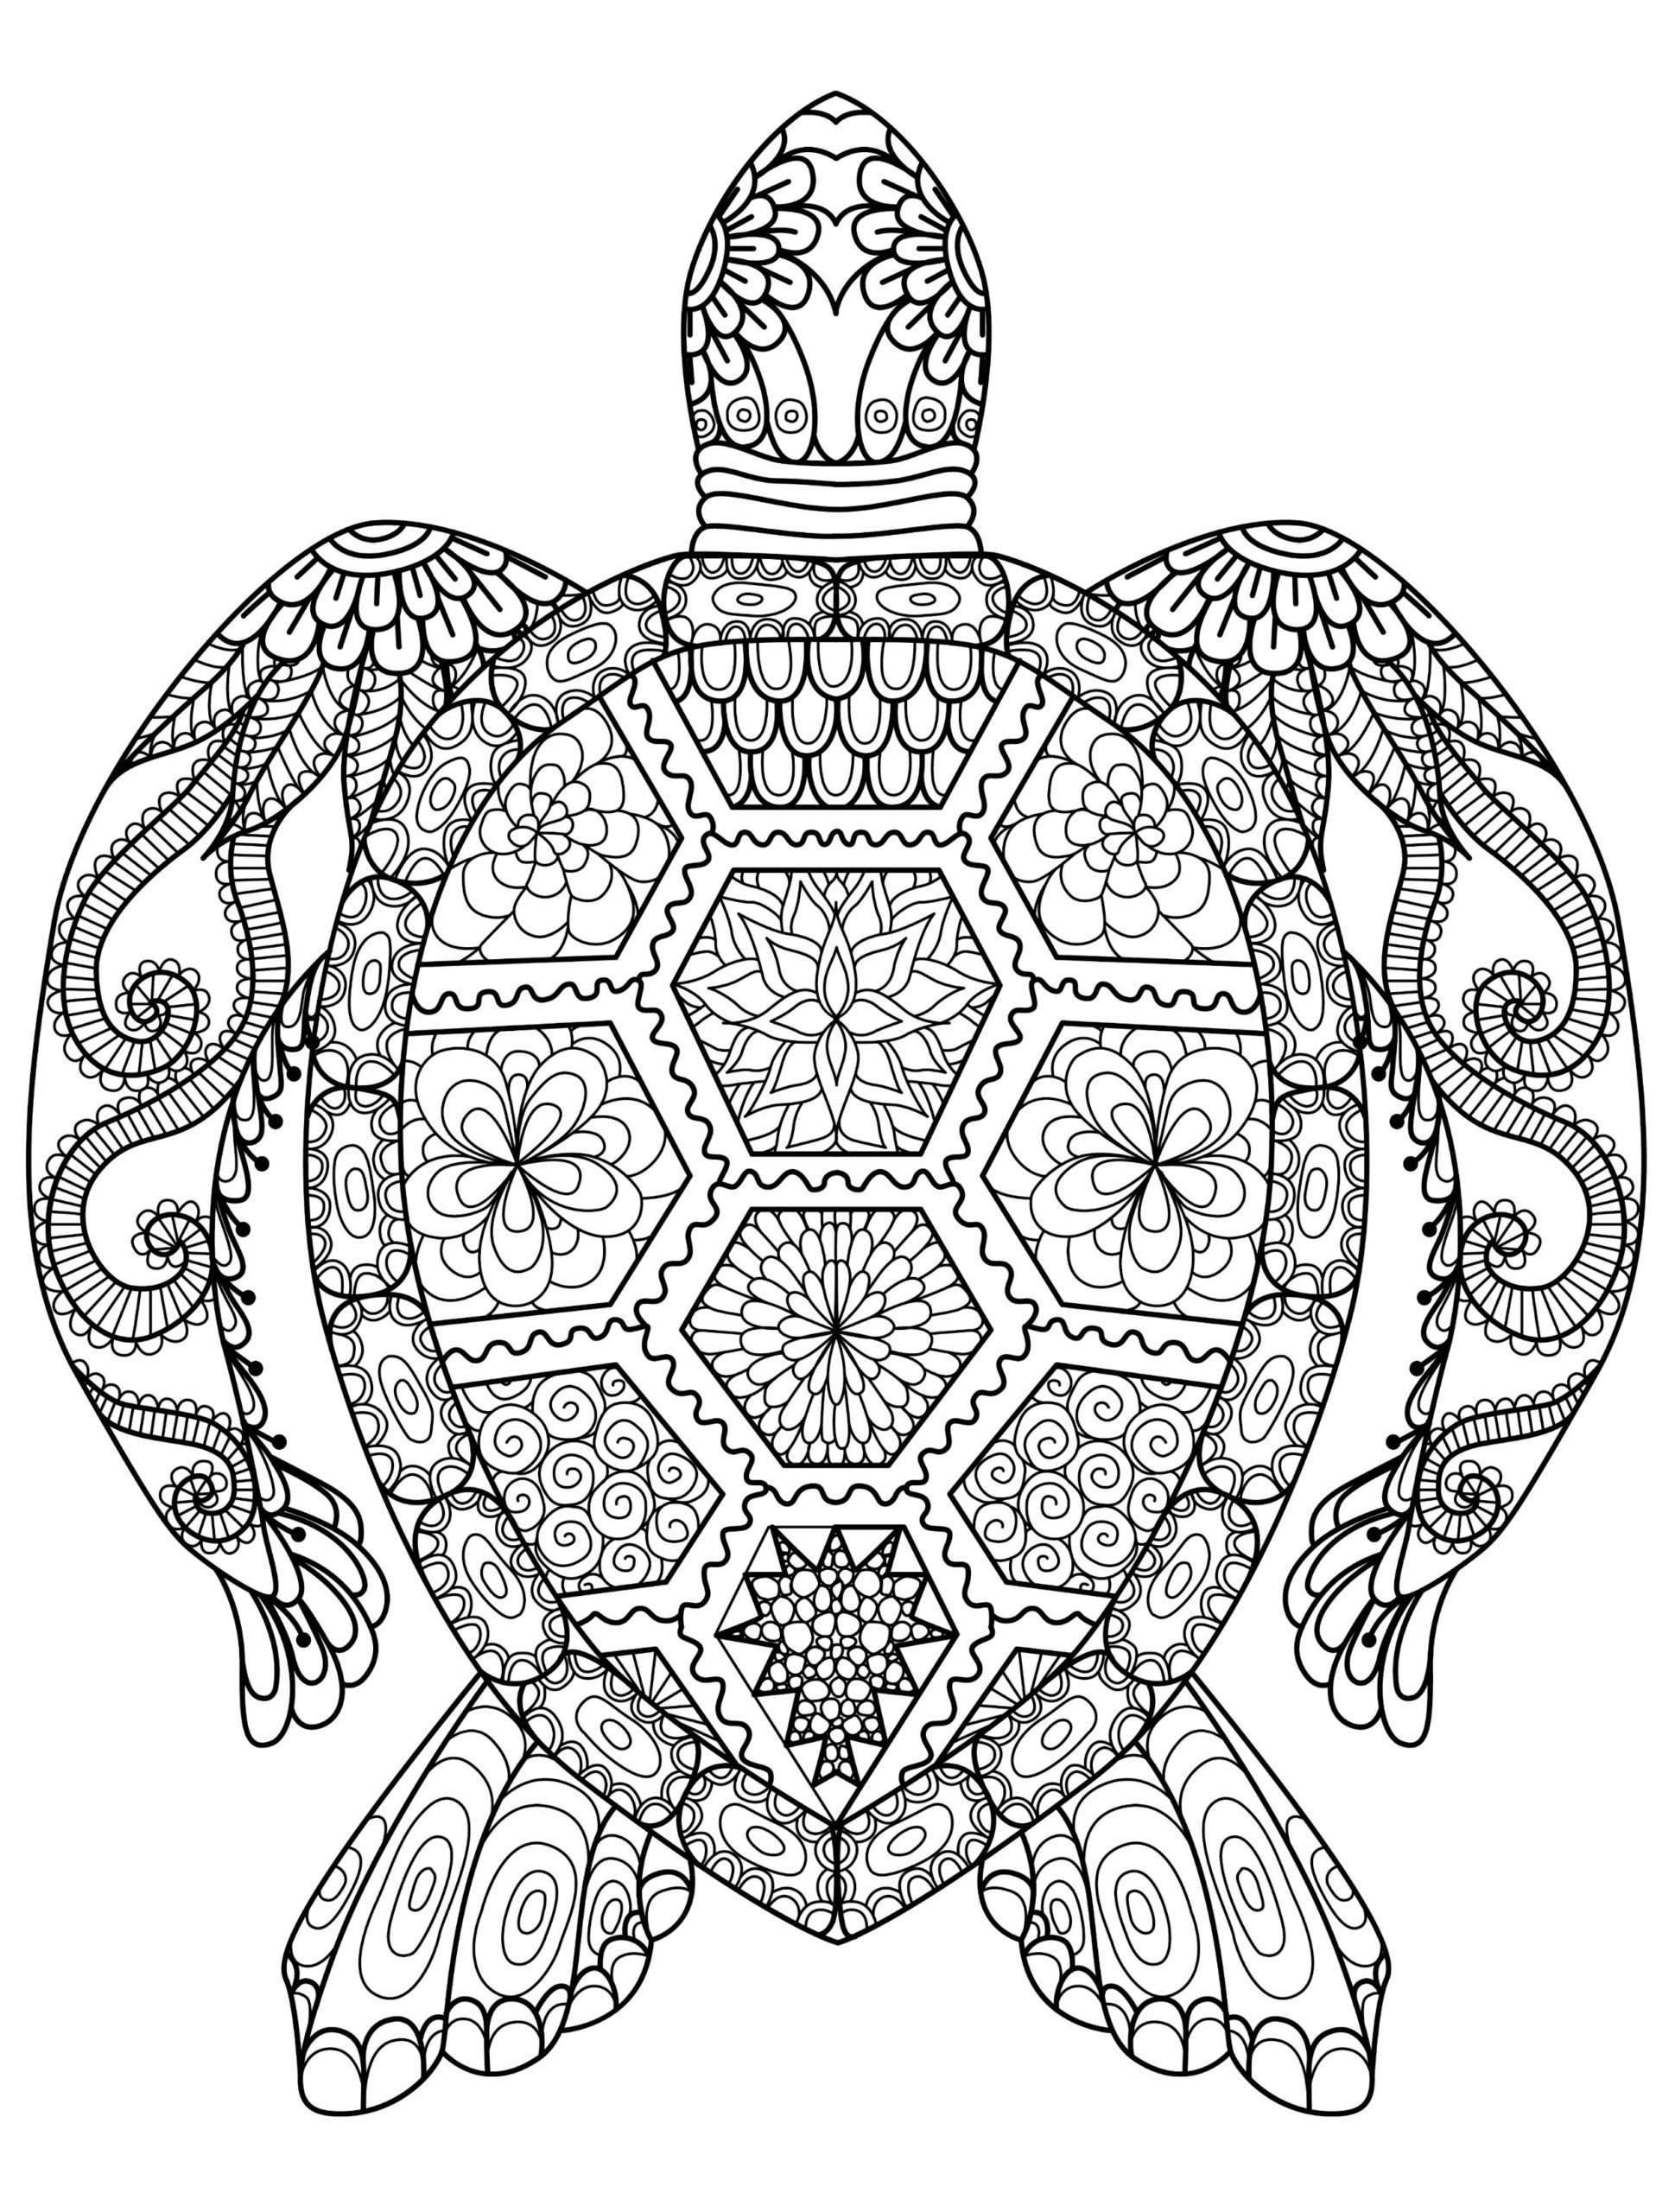 Adult Coloring Pages Animals Best Coloring Pages For Kids